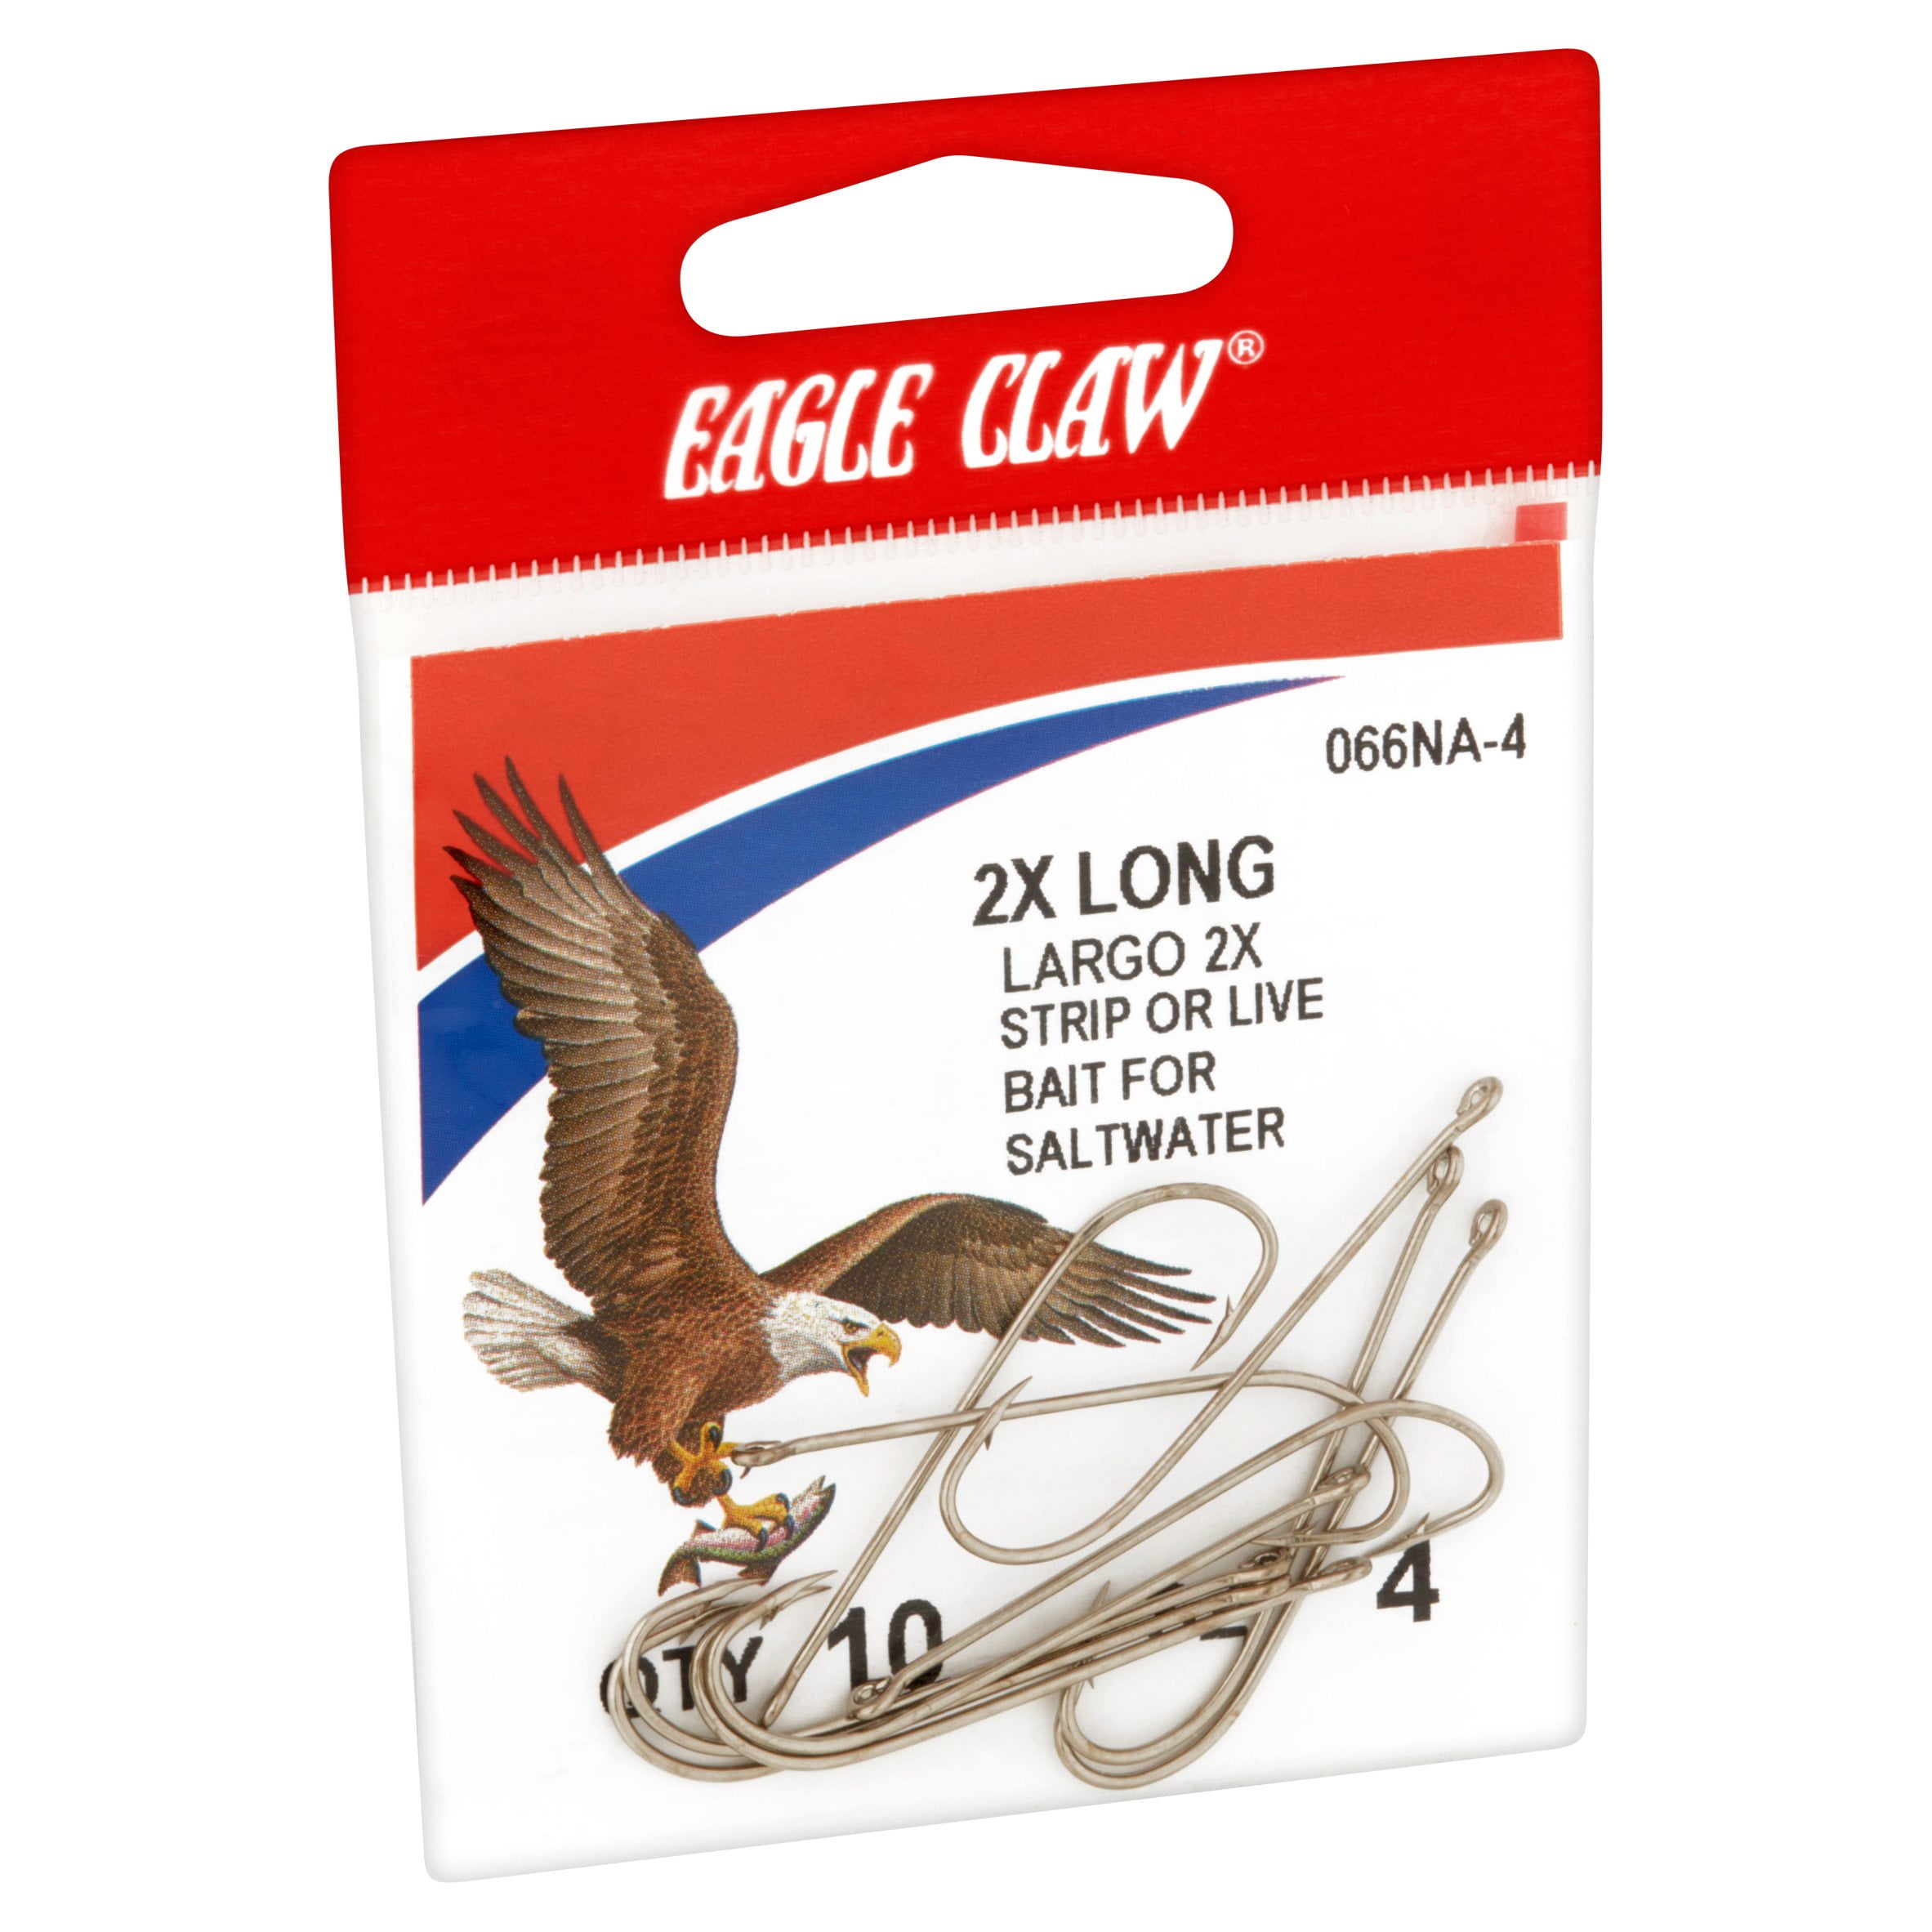 EAGLE CLAW 231XH 2X LONG SHANK DOUBLE LINE SNELLED HOOK, Fishing